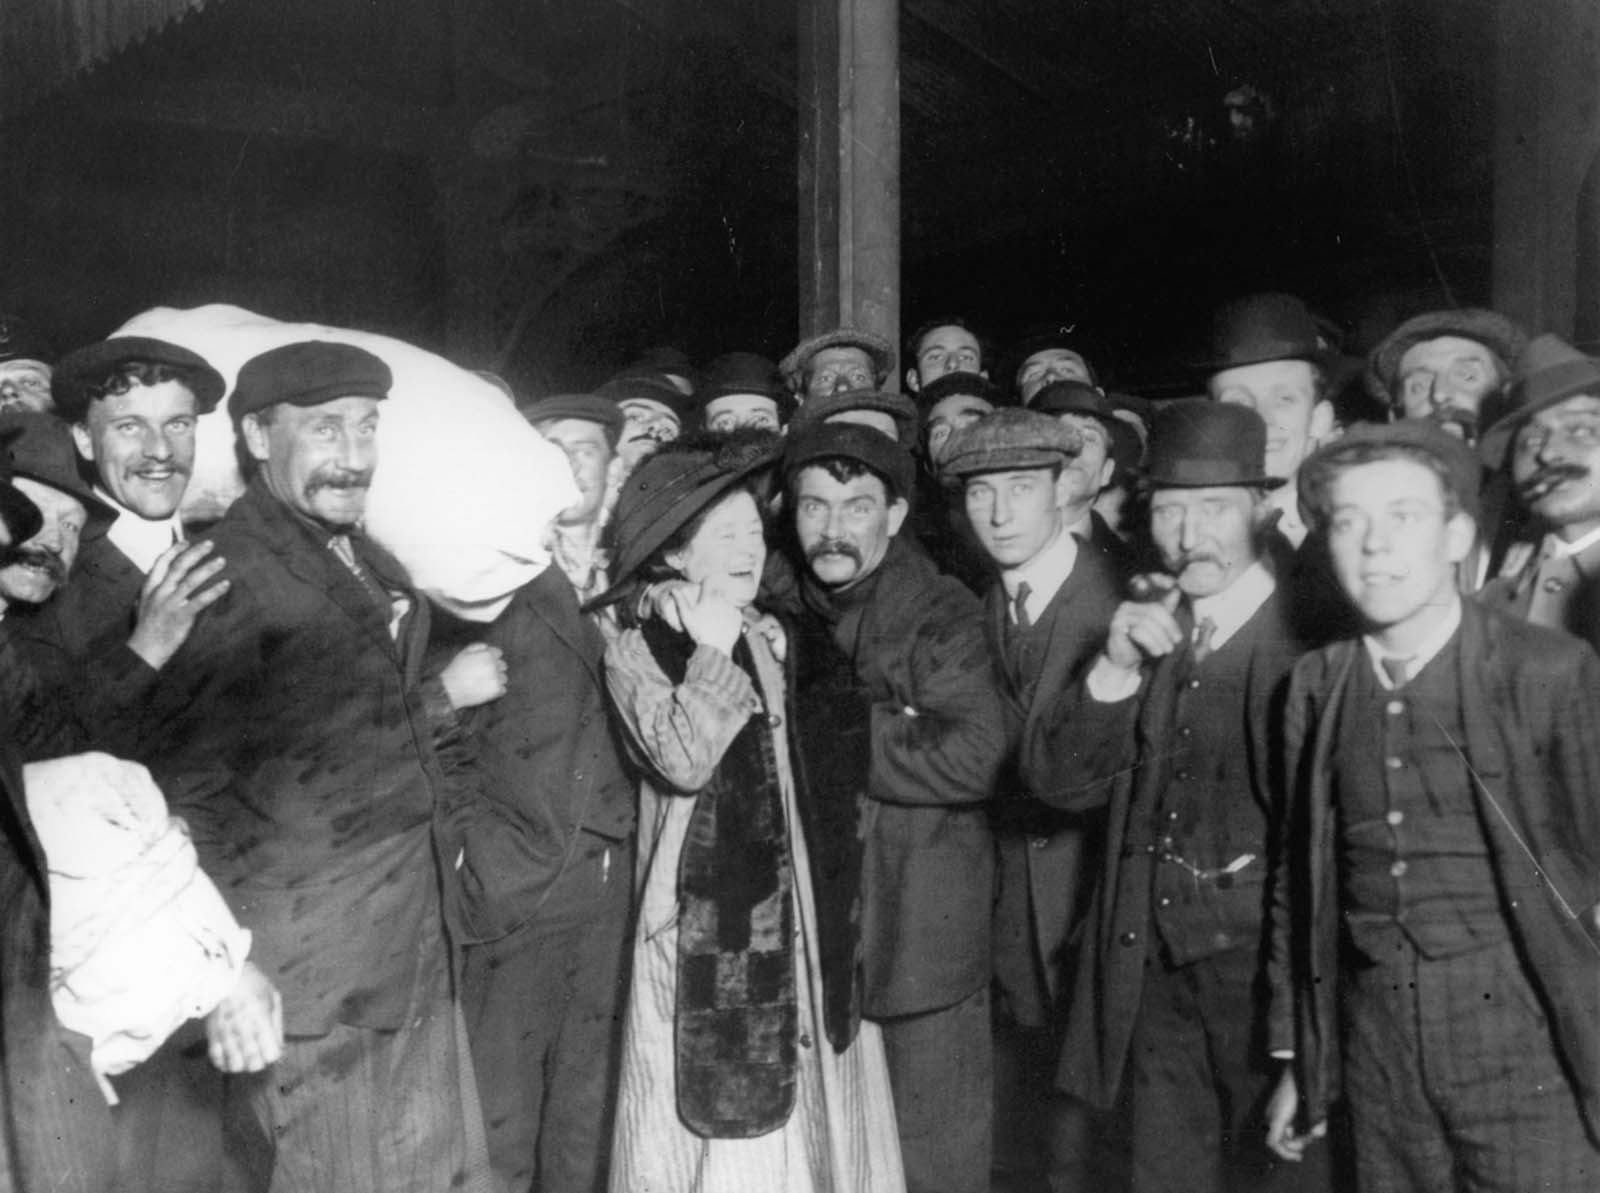 Survivors are greeted by relatives upon their return to Southampton.